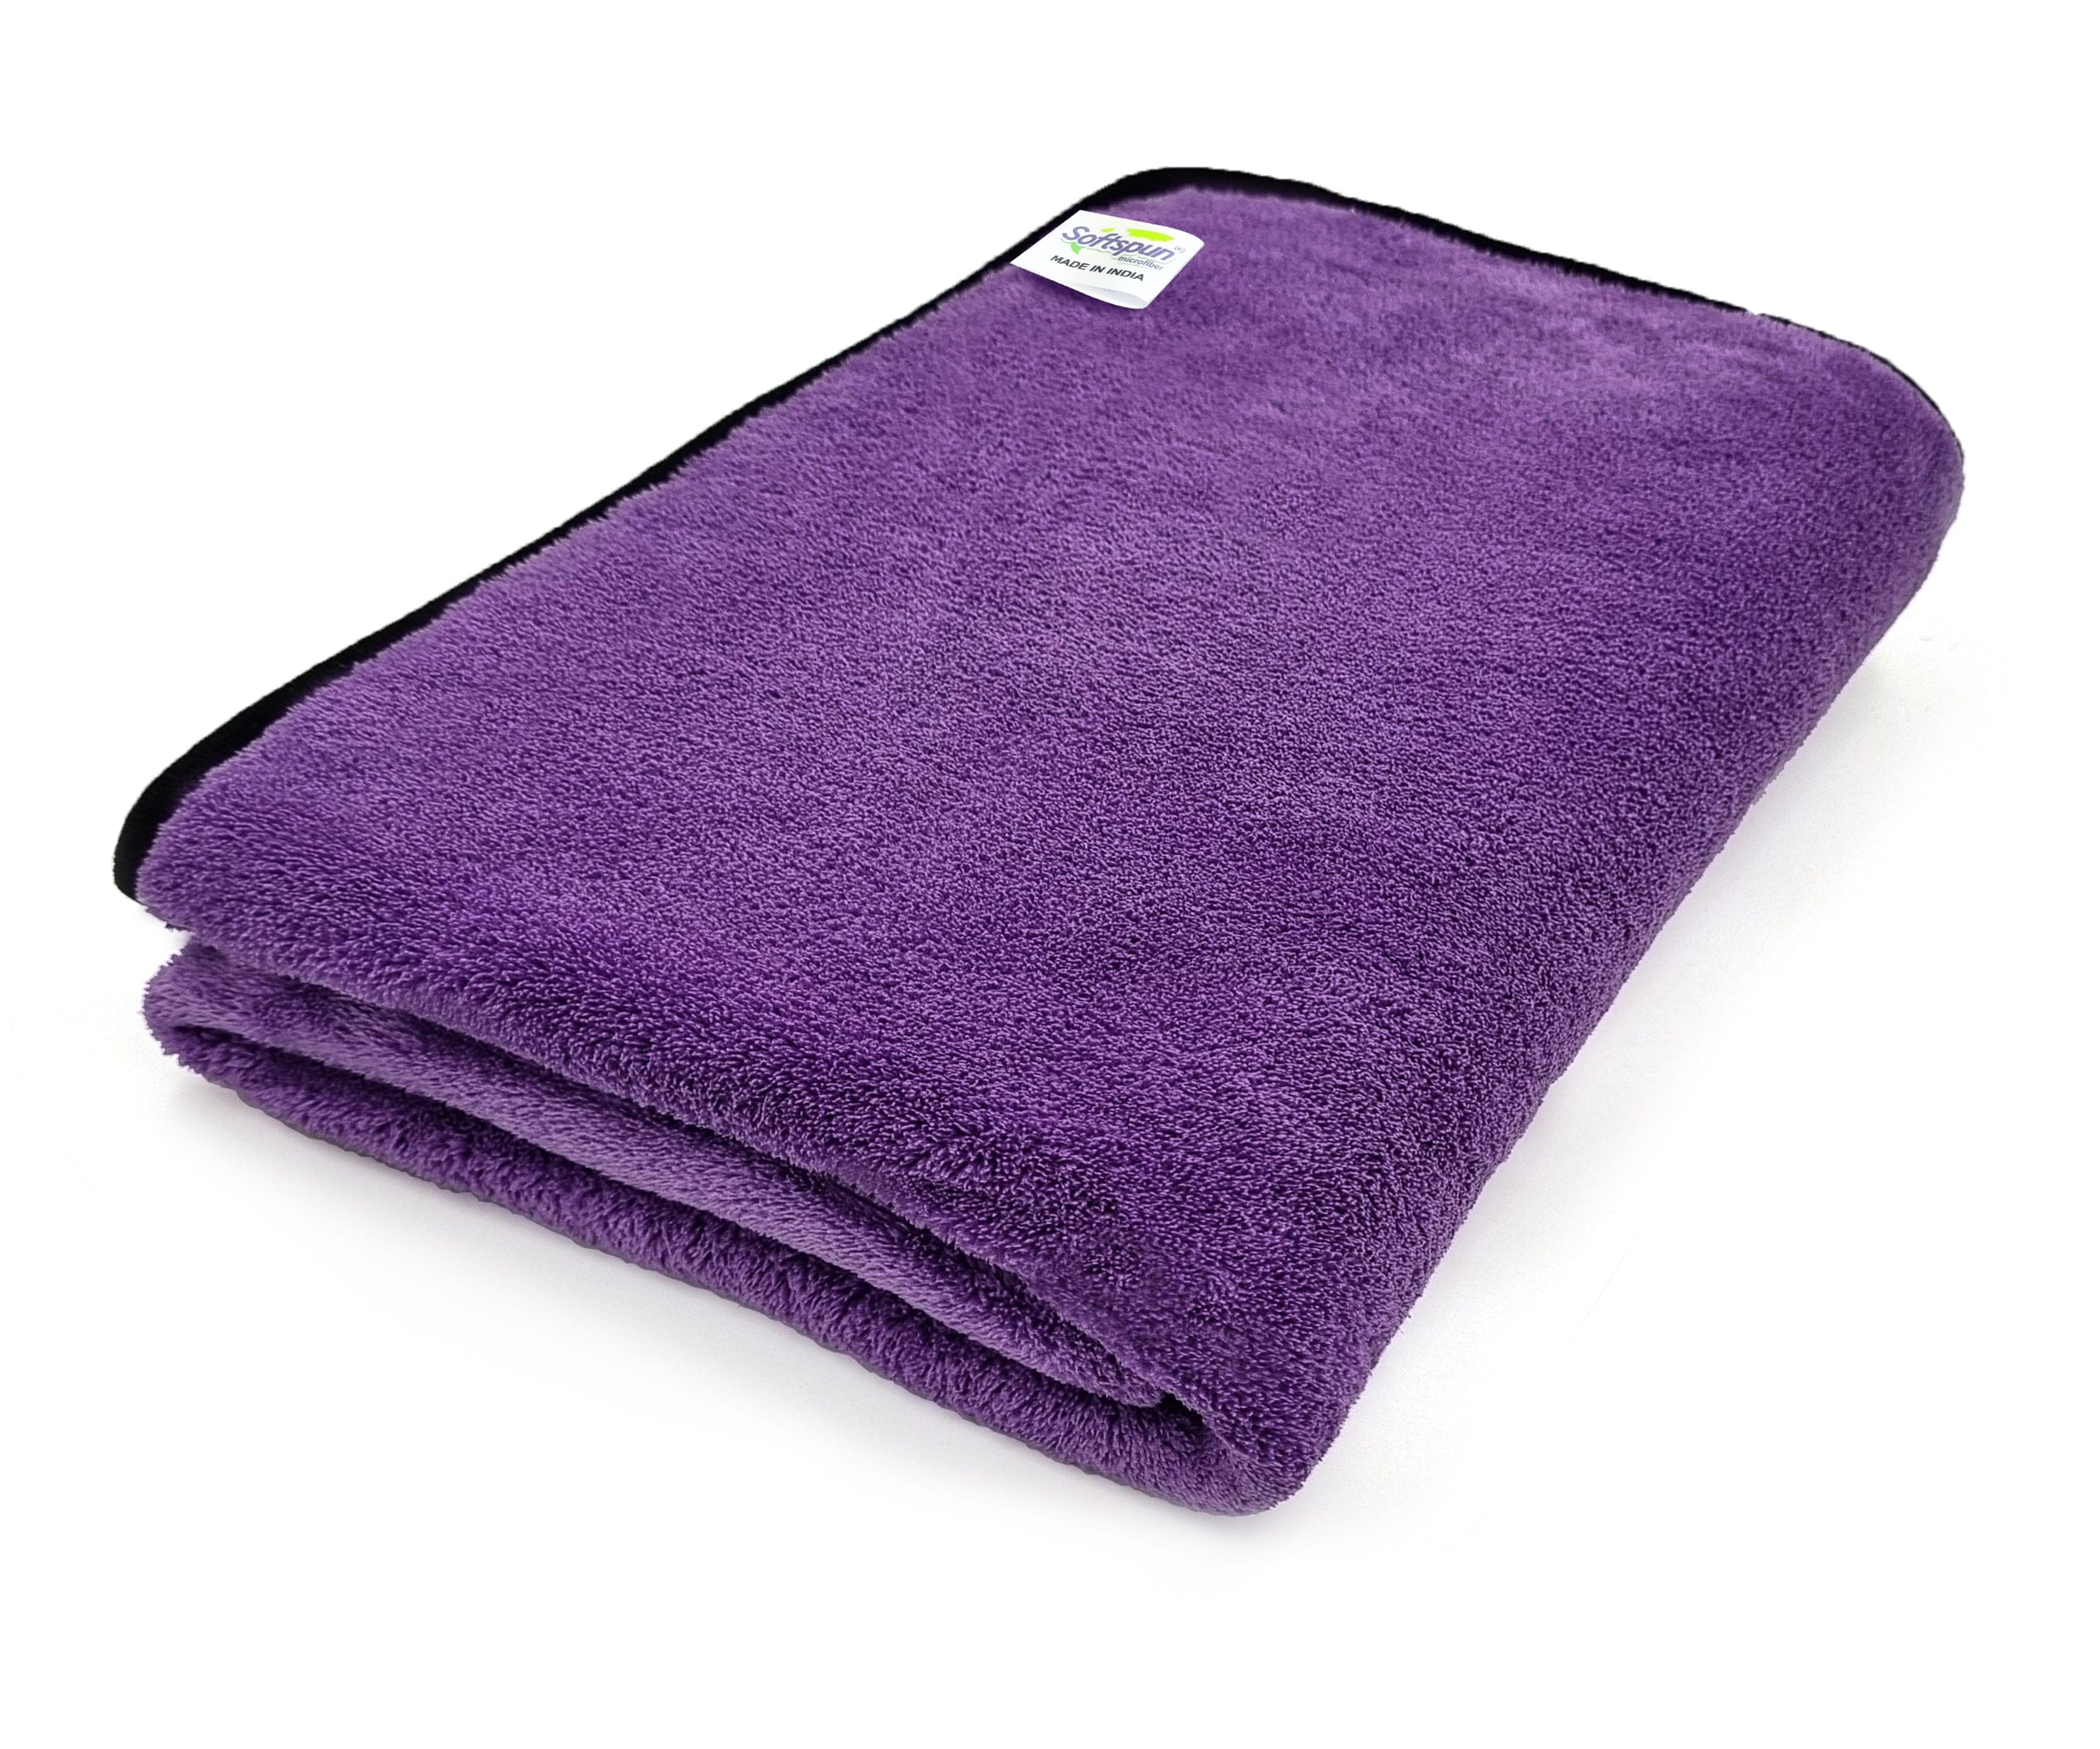 SOFTSPUN Microfiber Bath Towel 1 pc70140cm280 GSM , Ultra Absorbent Super Soft & Comfortable Quick Drying for Men & Women Daily Use Pack of 1 Extra Large Size Unisex.